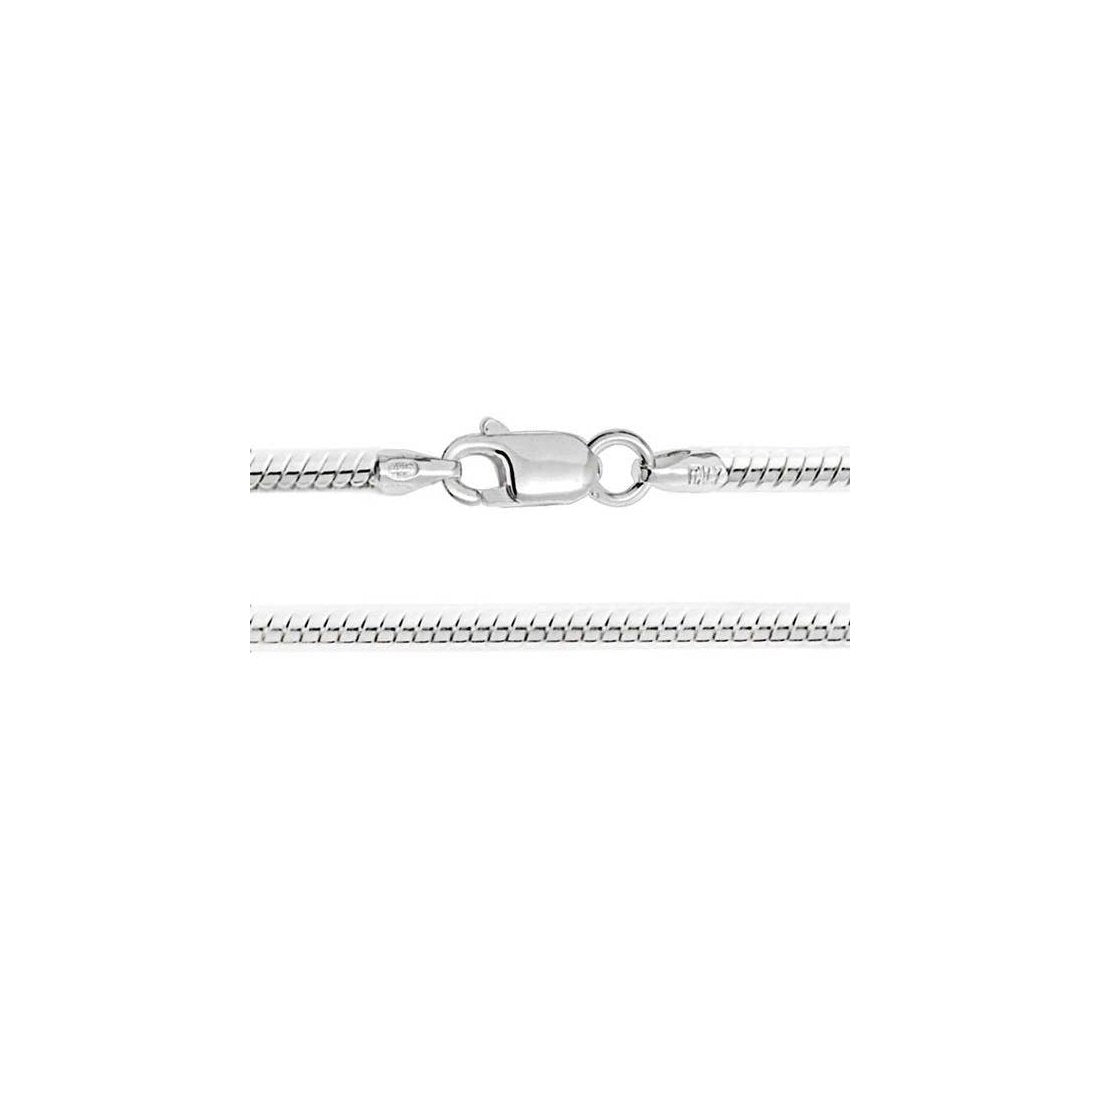 .7MM Rhodium Plated Square Snake Chain .925 Sterling Silver 16"-22"